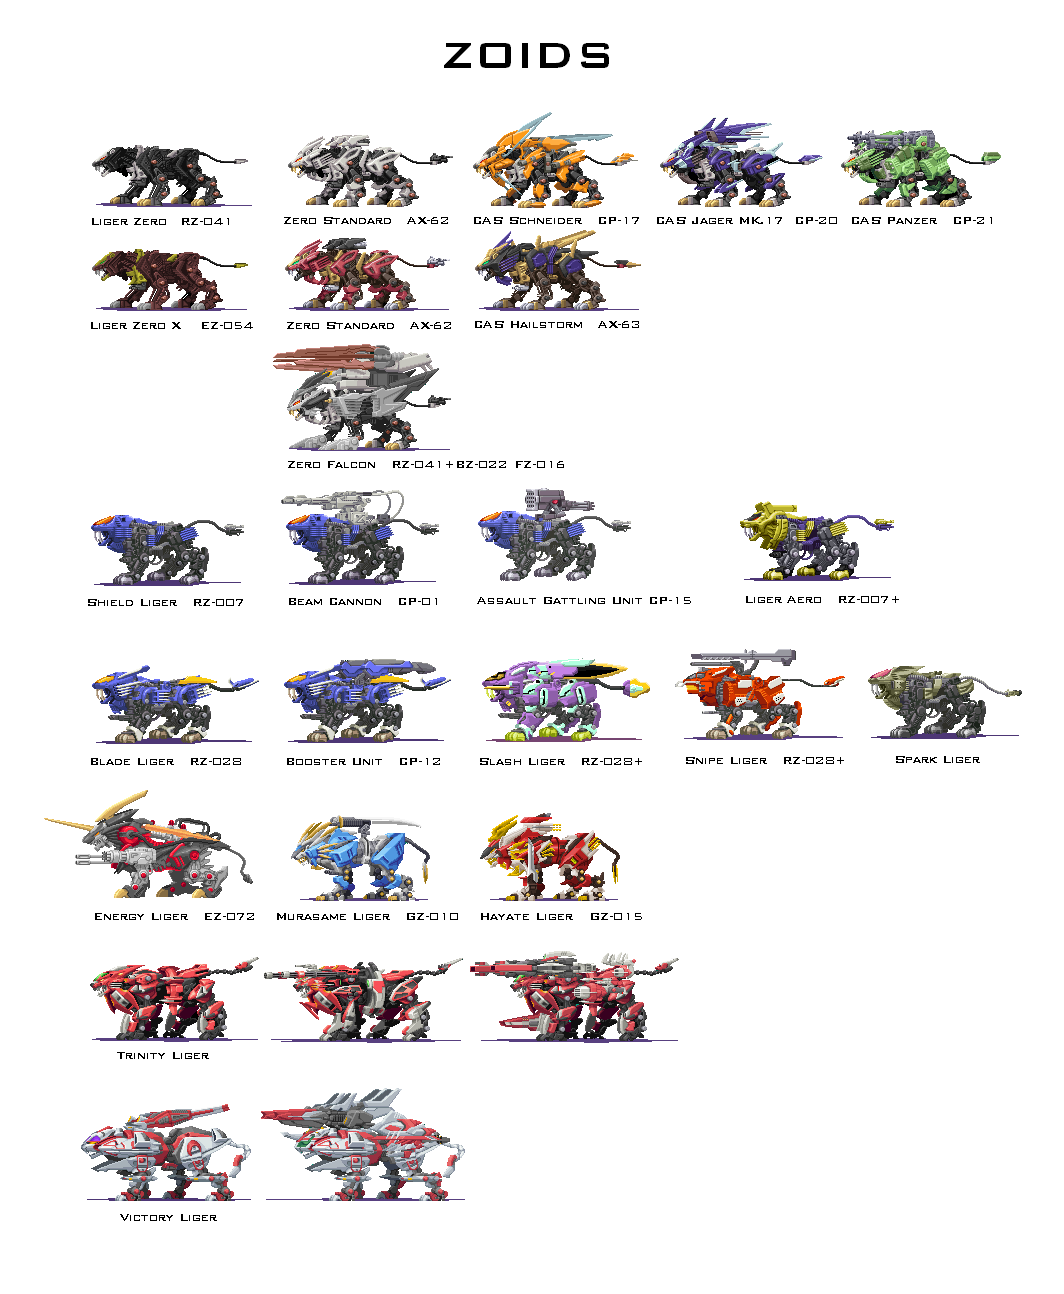 Zoids_Liger_Sprites_by_MechanicalOwls.png